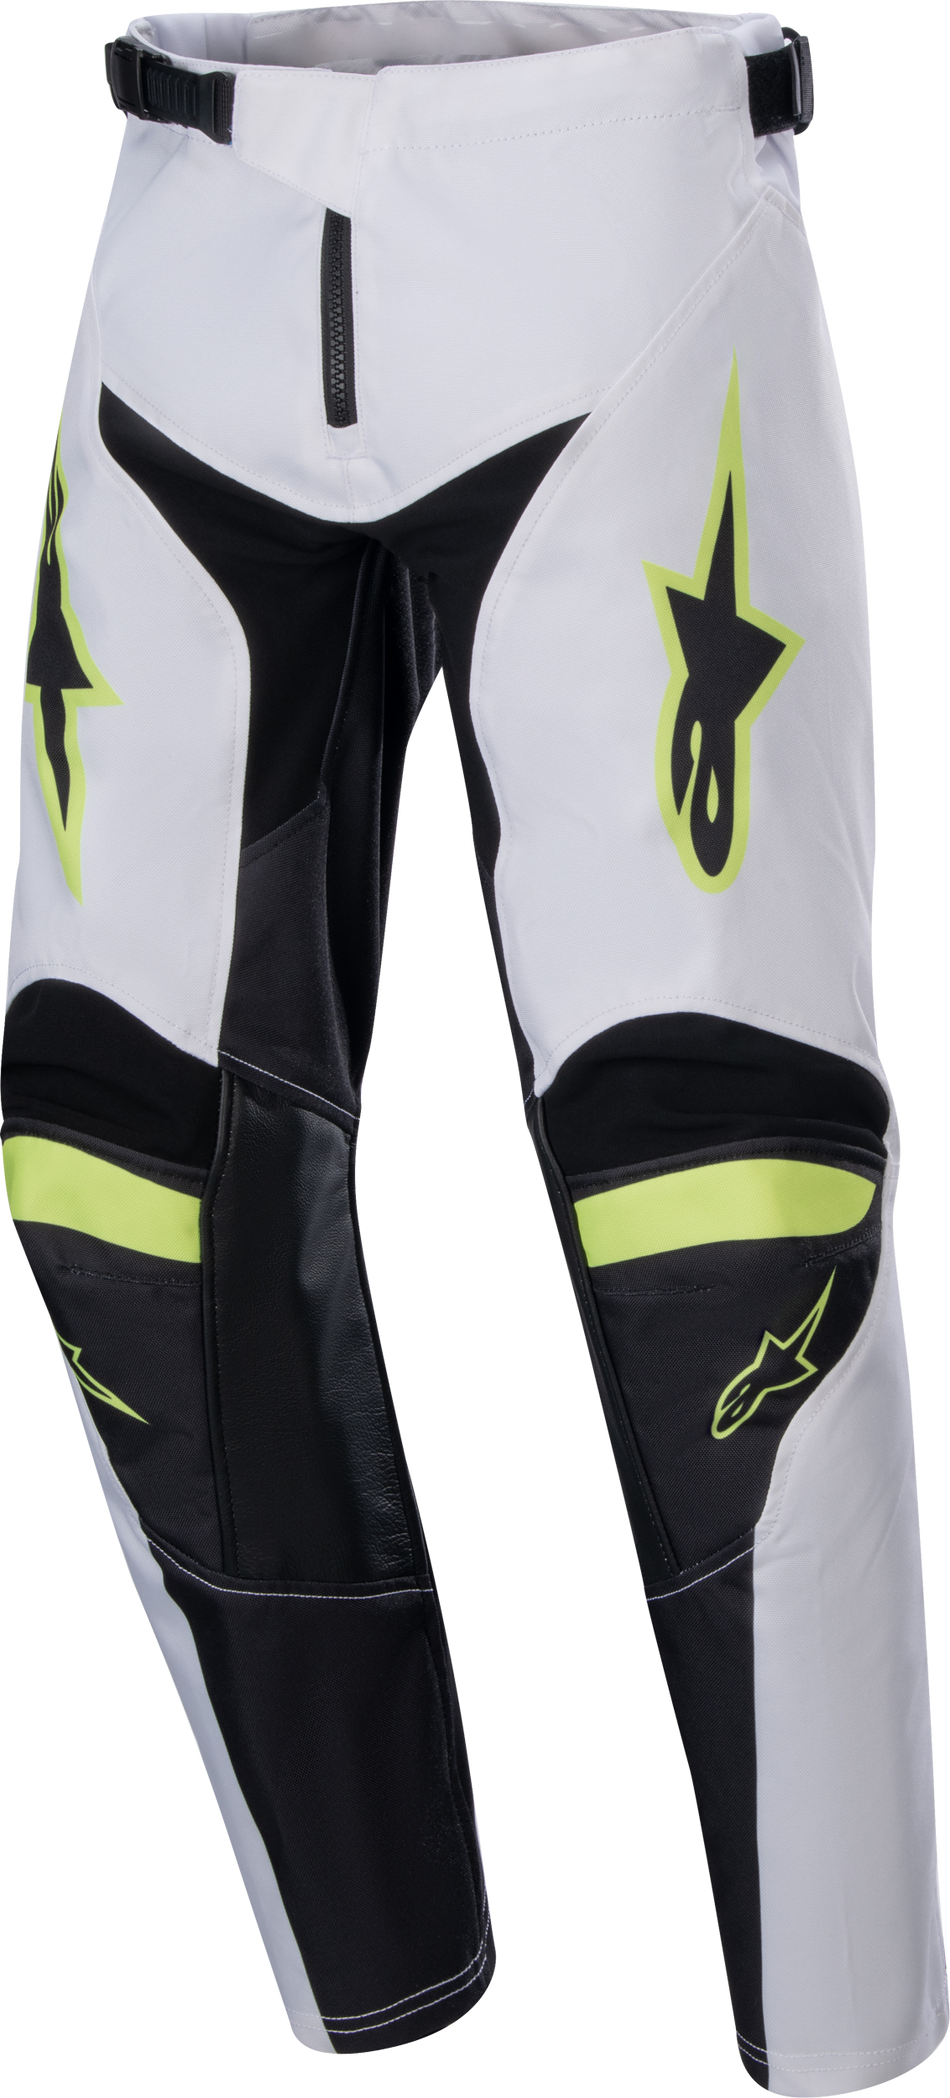 ALPINESTARS Youth Racer Lucent Pants Wht/Neon Rd/Ylw Fluo Sz 26 3743724-2029-26